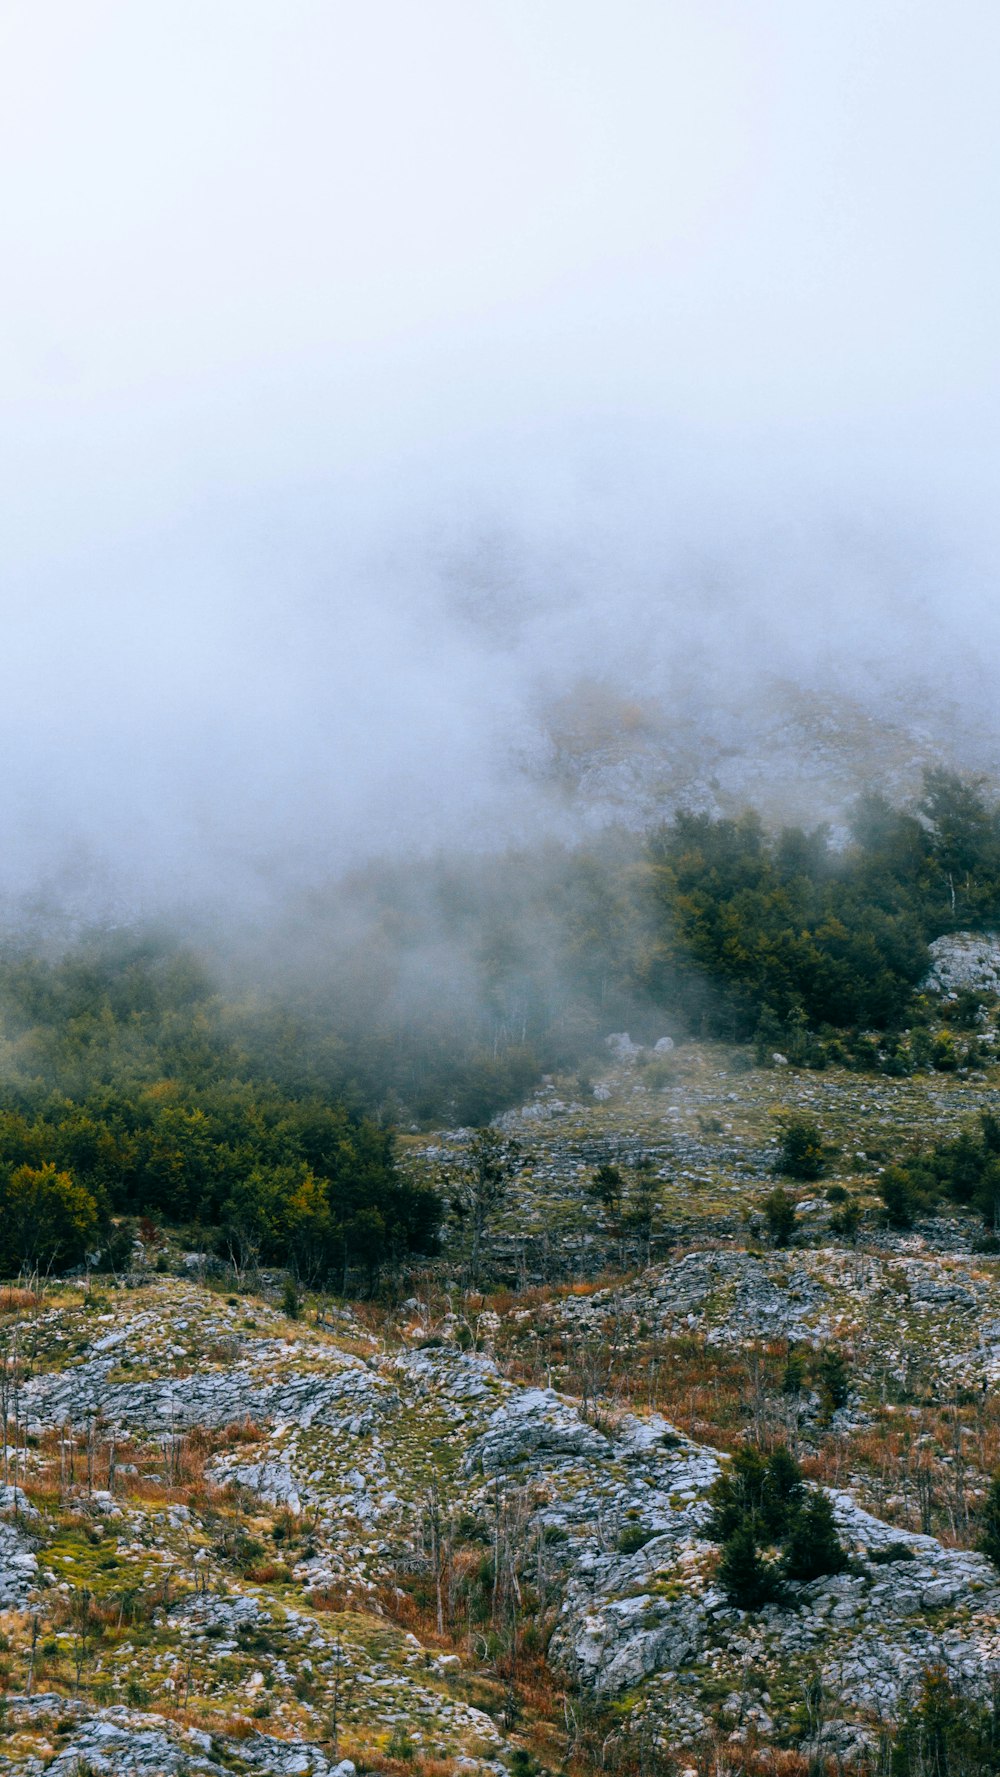 a mountain covered in fog and low lying vegetation